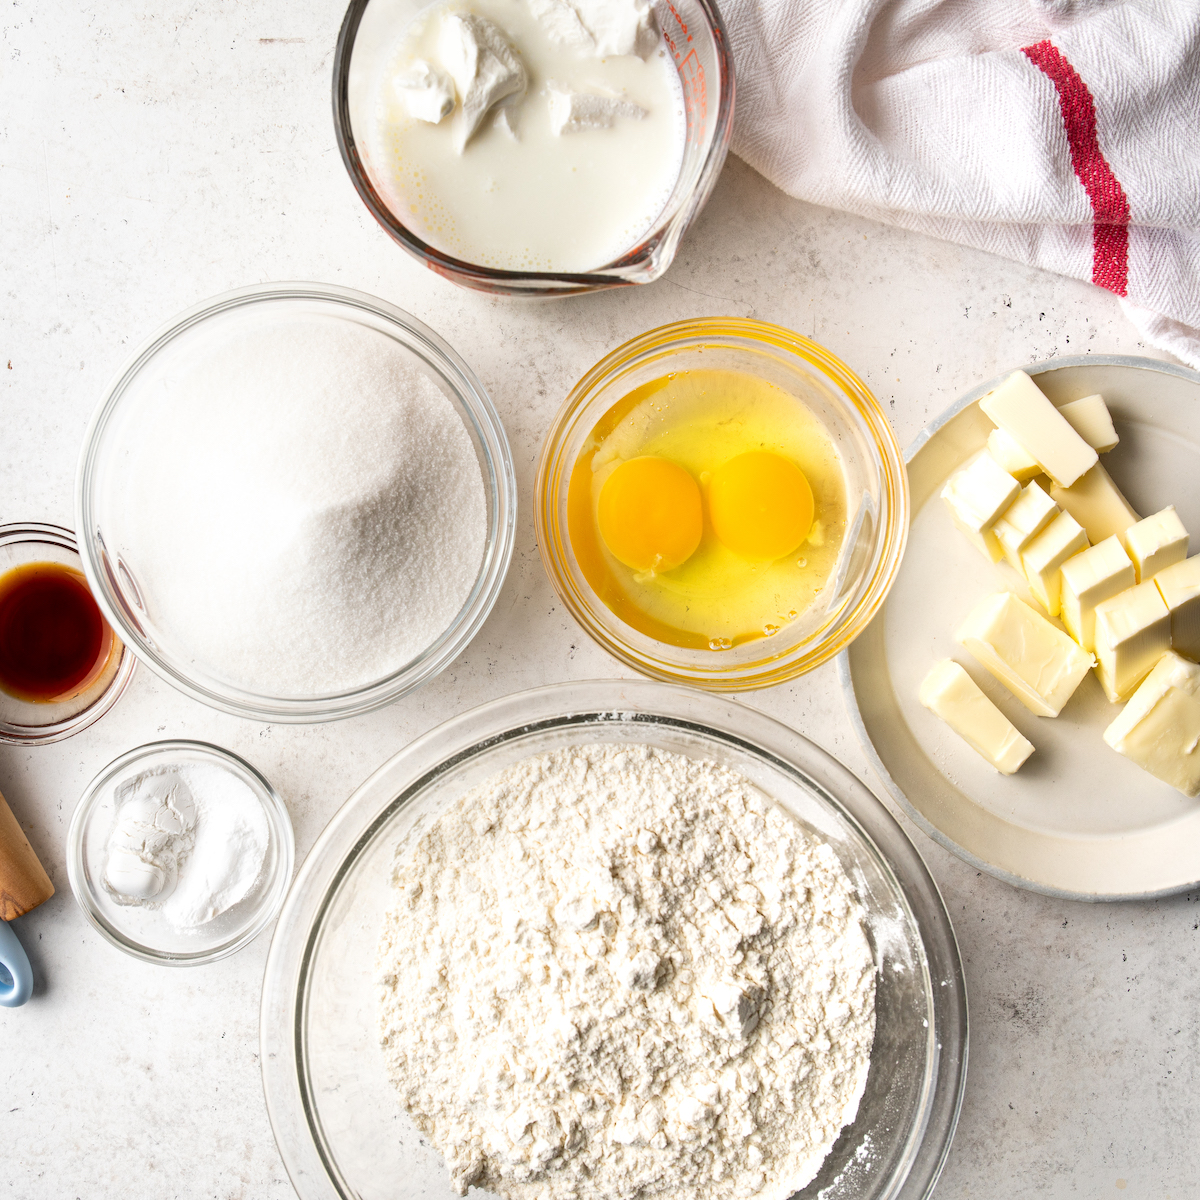 All of the ingredients to make coffee cake on a white surface.